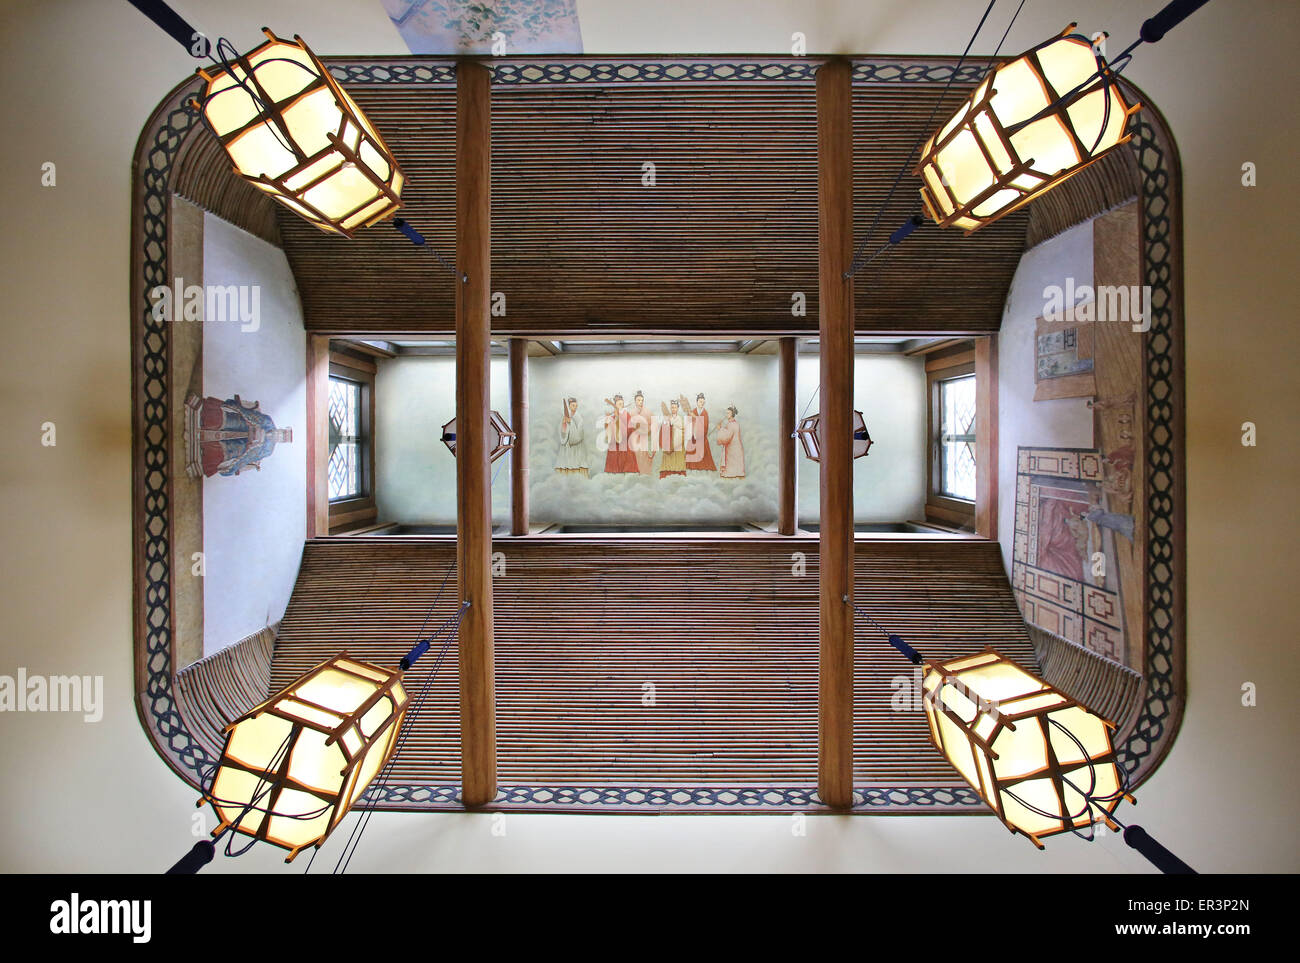 Chinese paper lanterns are mounted to the ceiling of the renovated Chinesisches Haus (lit. Chinese House) located inside the park of Oranienbaum Palace in Oranienbaum, Germany, 26 May 2015. The interior decoration has seen extensive restoration over the last two years. The painted paper wallpapers and the furniture were partially reconstructed. The teahouse built by Franz, Duke of Anhalt-Dessau, in 1795 has undergone extensive refurbishment since 2009 at a total cost of 1.3 million euros and is now open to the public. It is the centrepiece of the only currently still largely preserved English- Stock Photo